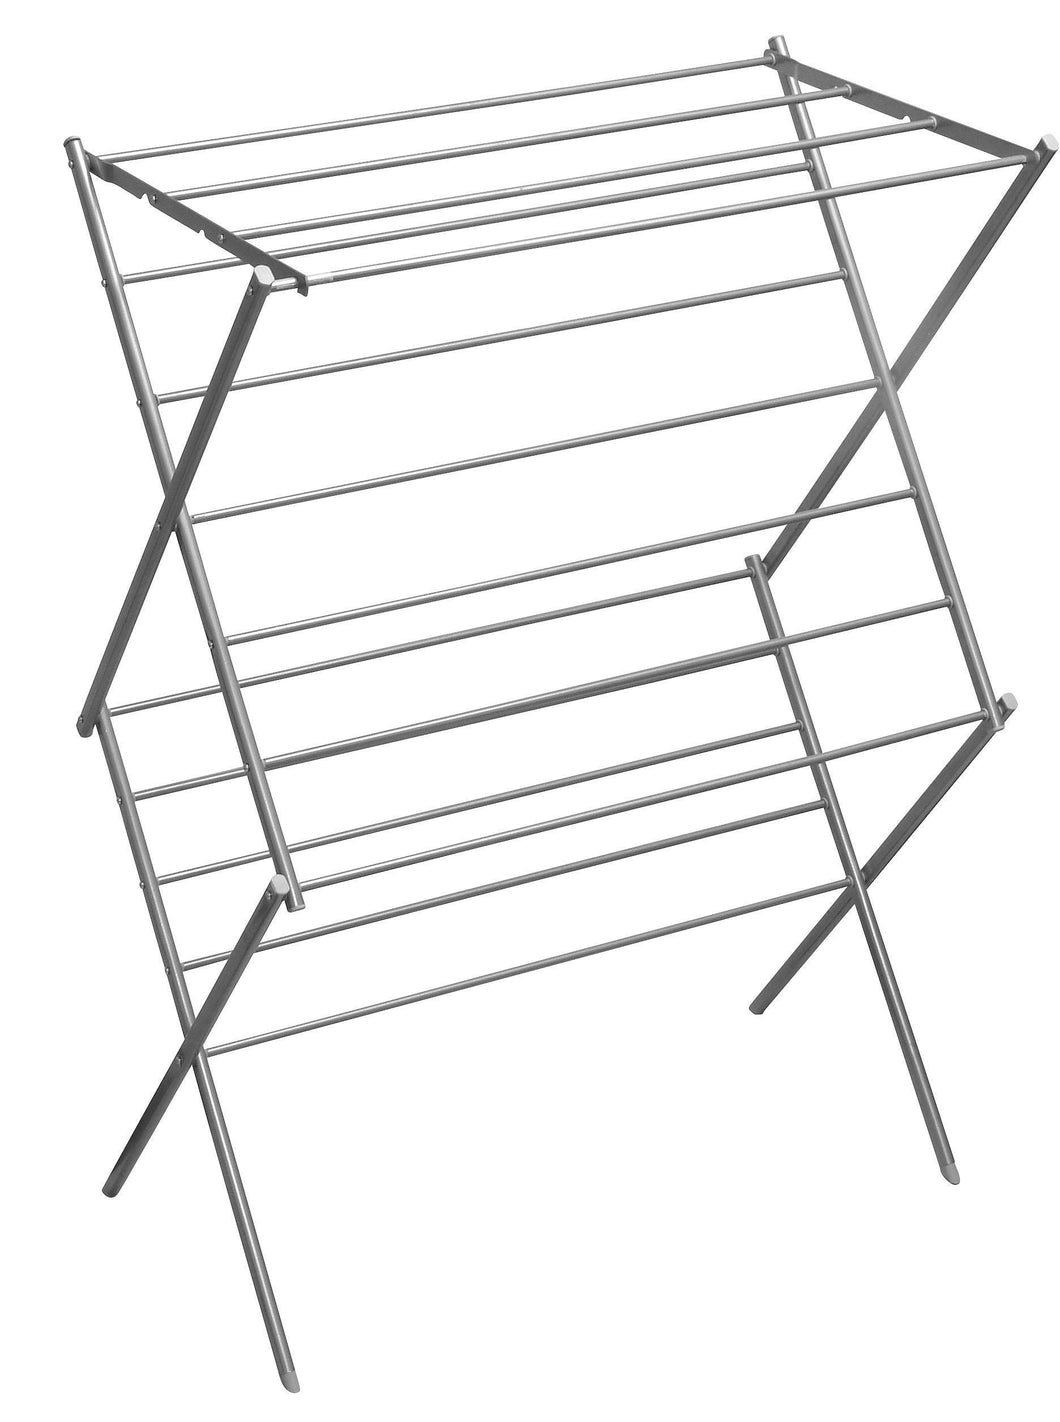 Organize with ybm home 2 tier deluxe foldable clothes steel drying rack 1622 11